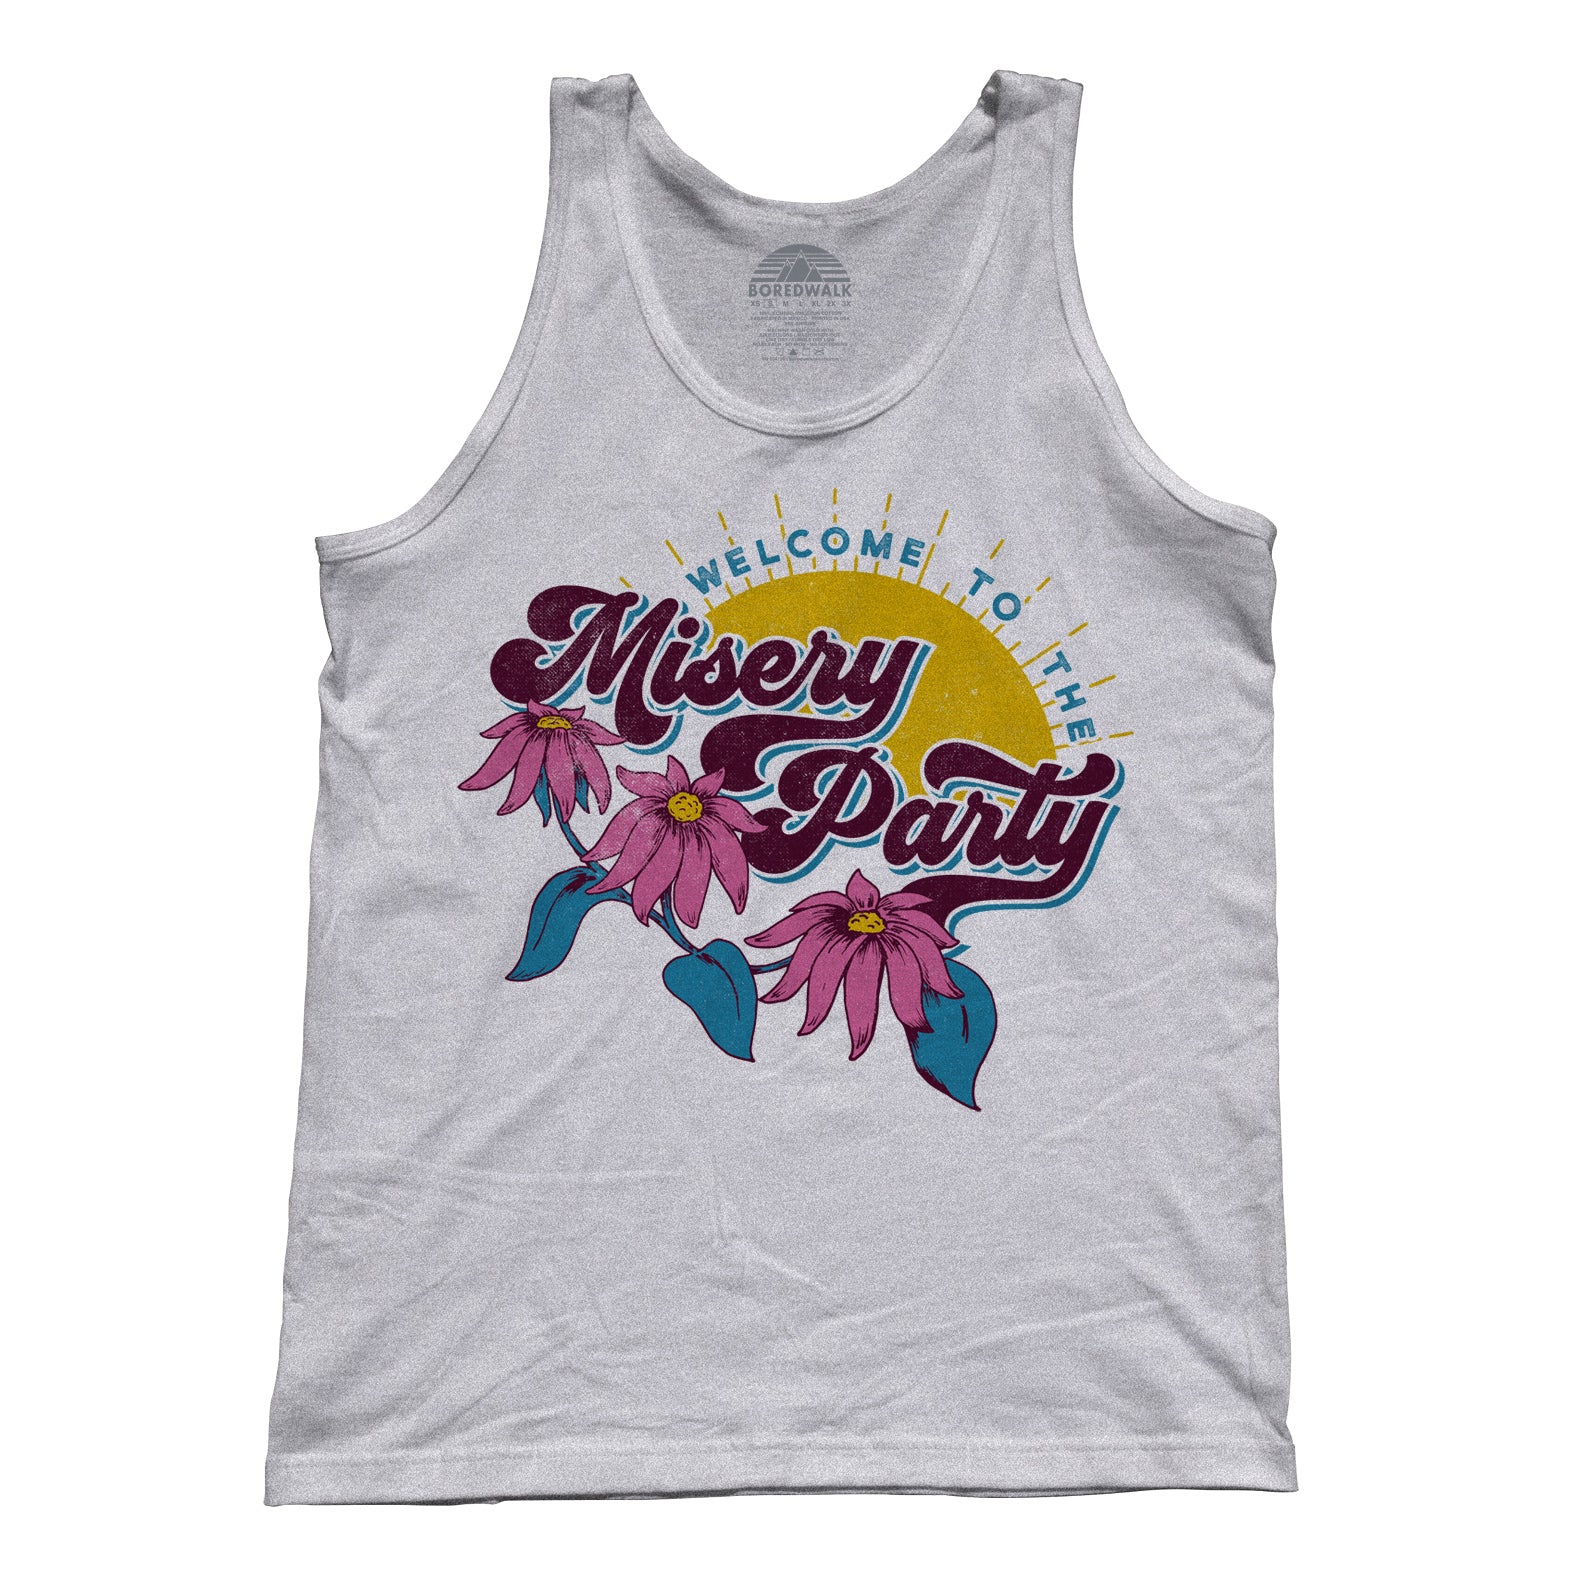 Unisex Welcome To The Misery Party Tank Top